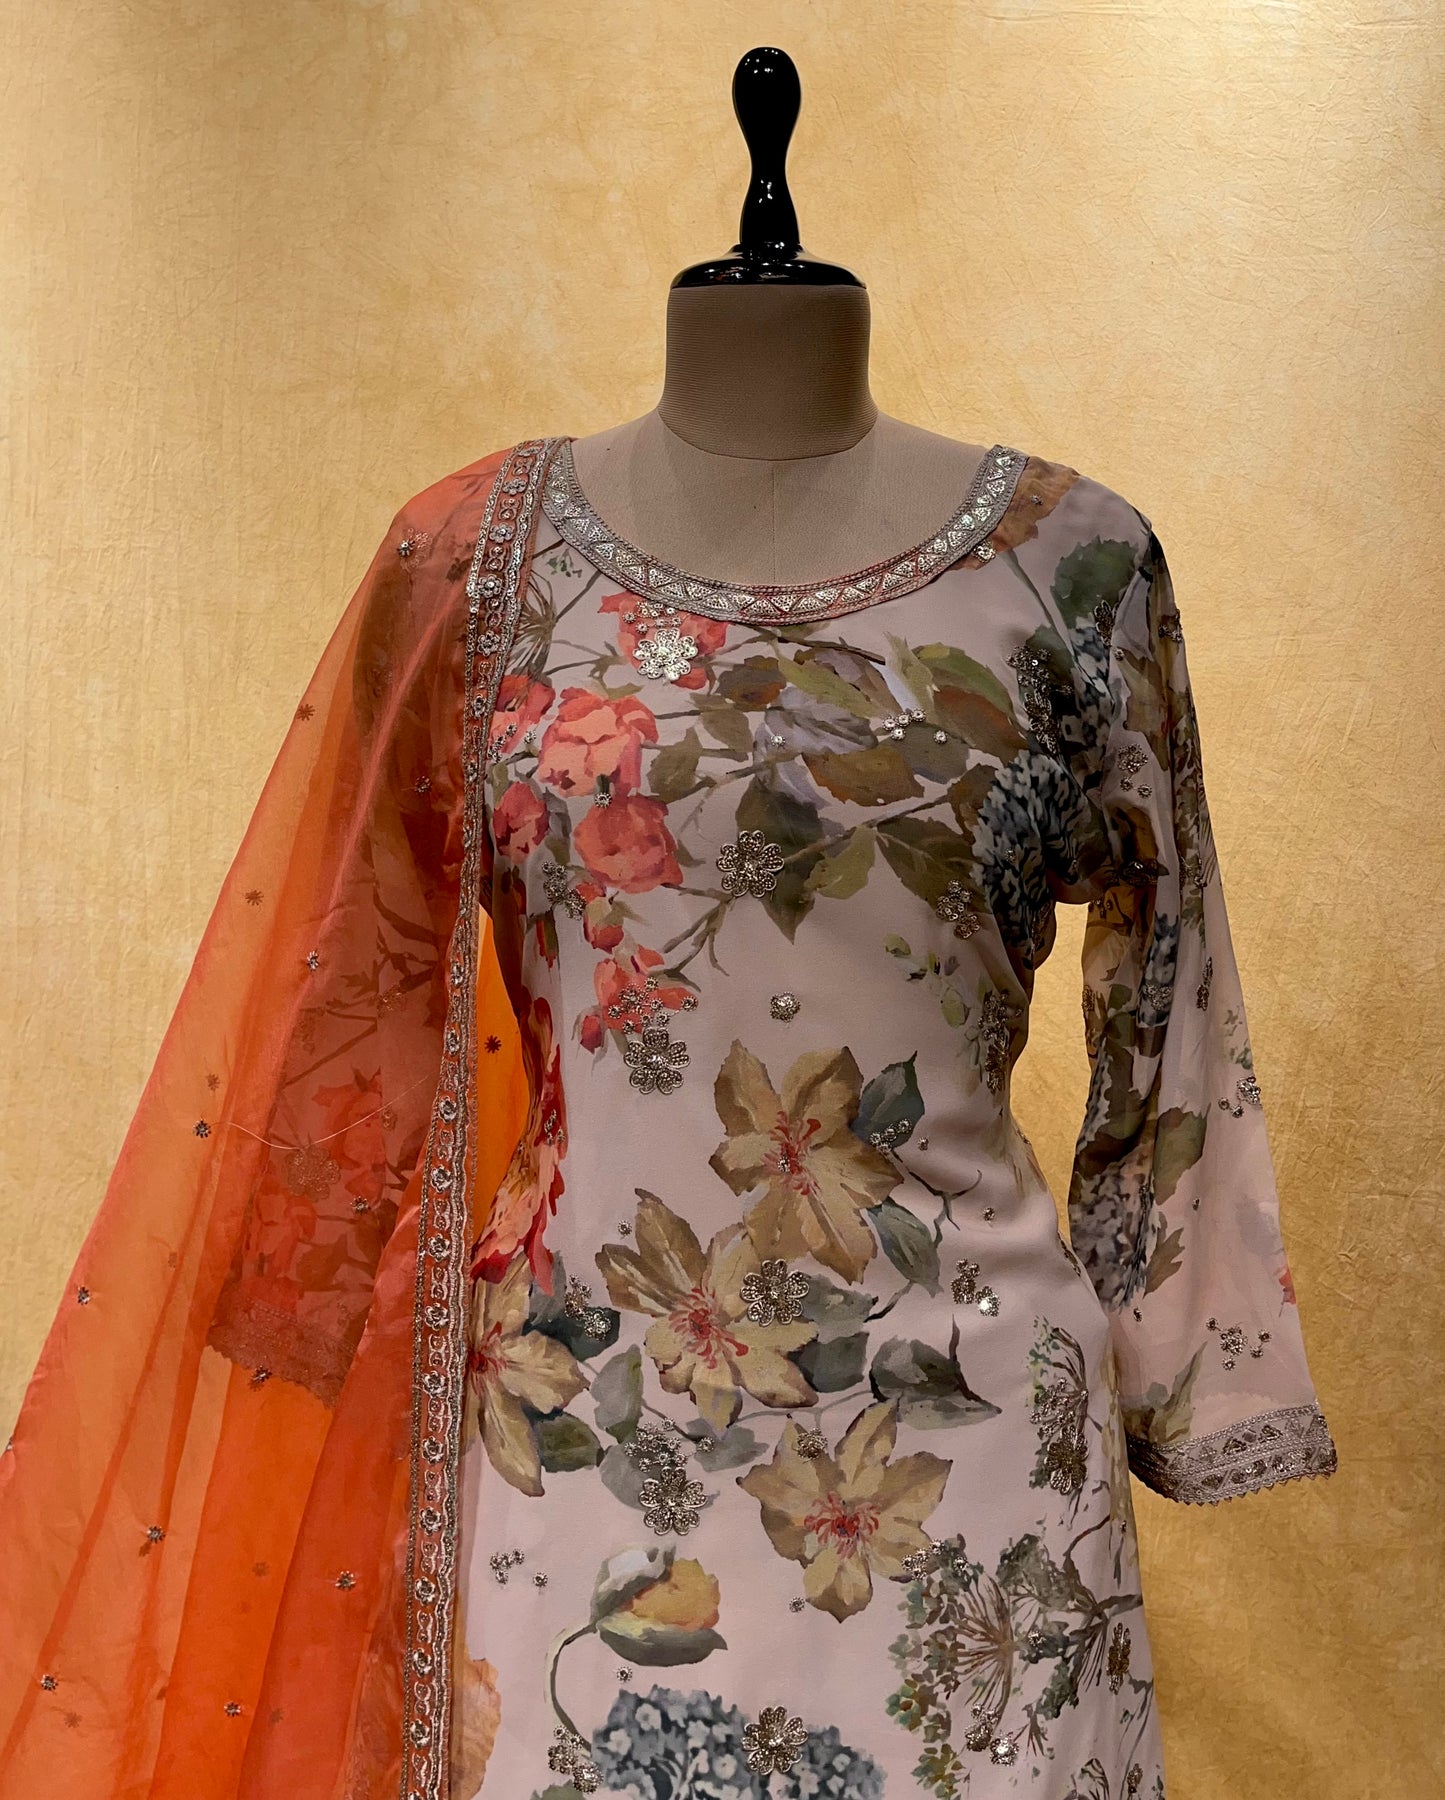 OFF WHITE COLOR PRINTED GEORGETTE SHARARA SUIT WITH ORGANZA DUPATTA EMBELLISHED WITH SEQUINS & RESHAM WORK